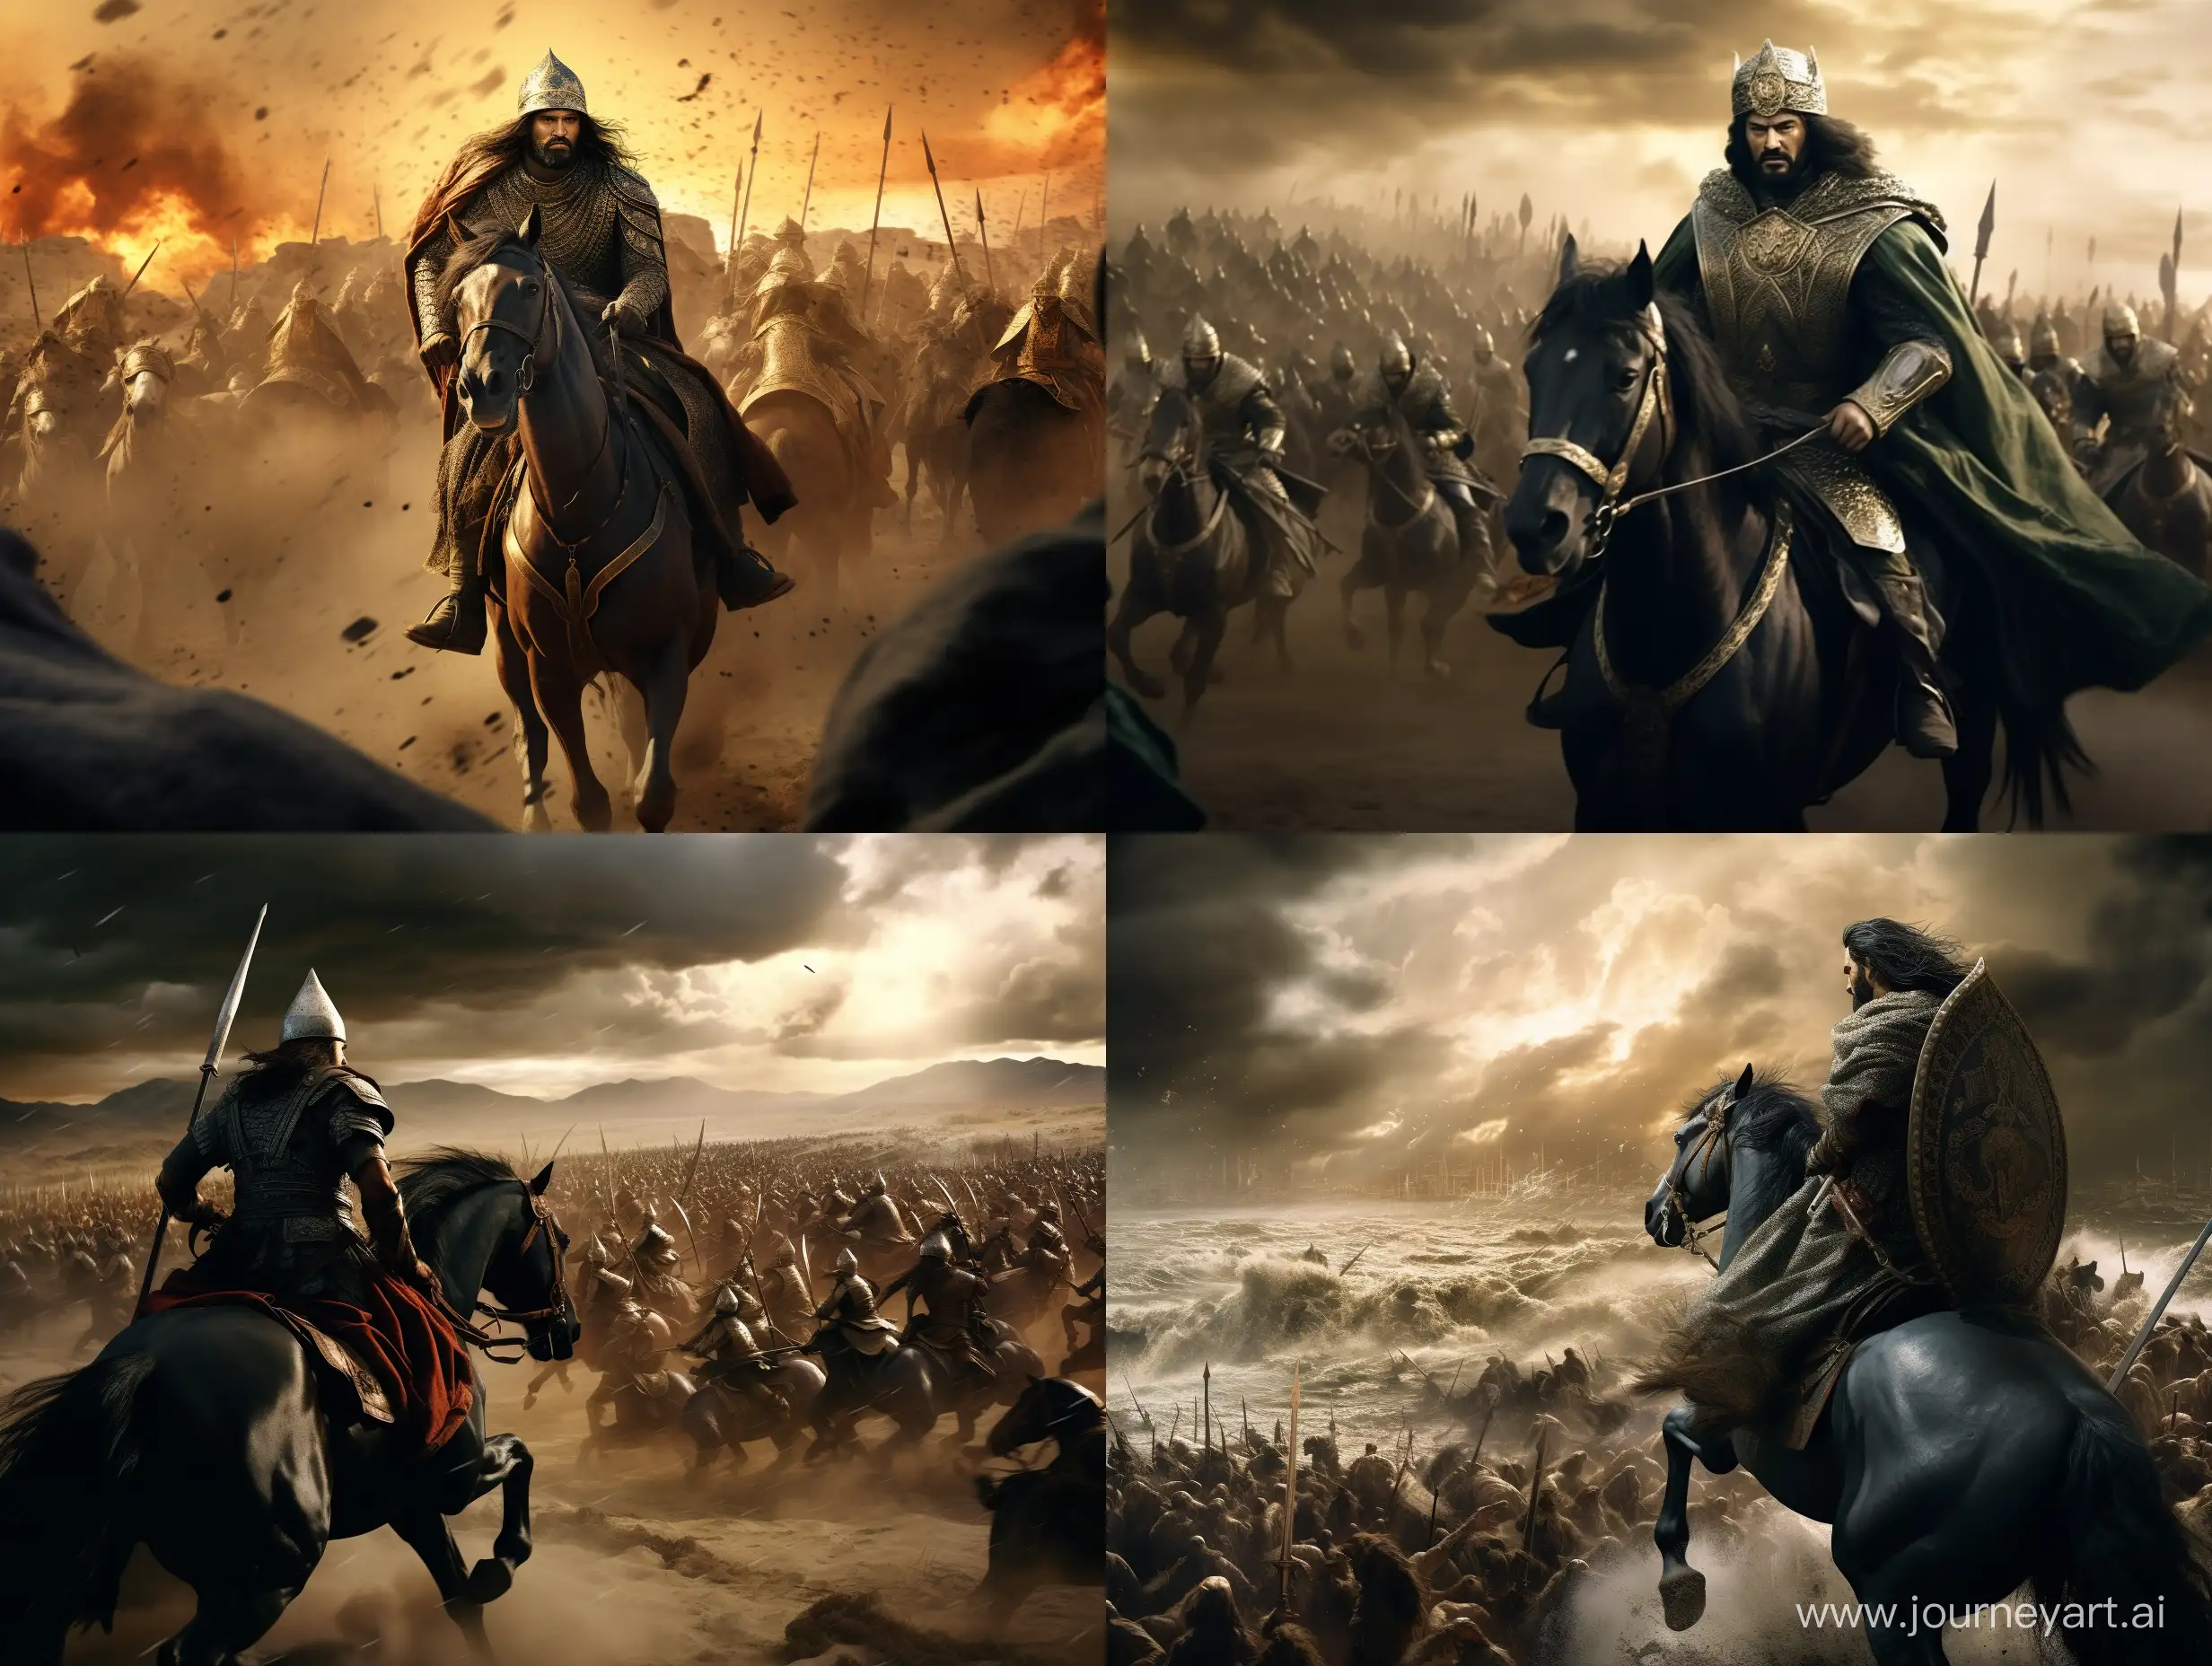 The Battle of Saladin.  Against the Crusaders, the battles of my back, between the two parties, a historical and distorted story, cinematic drama, stormy winds, epic war